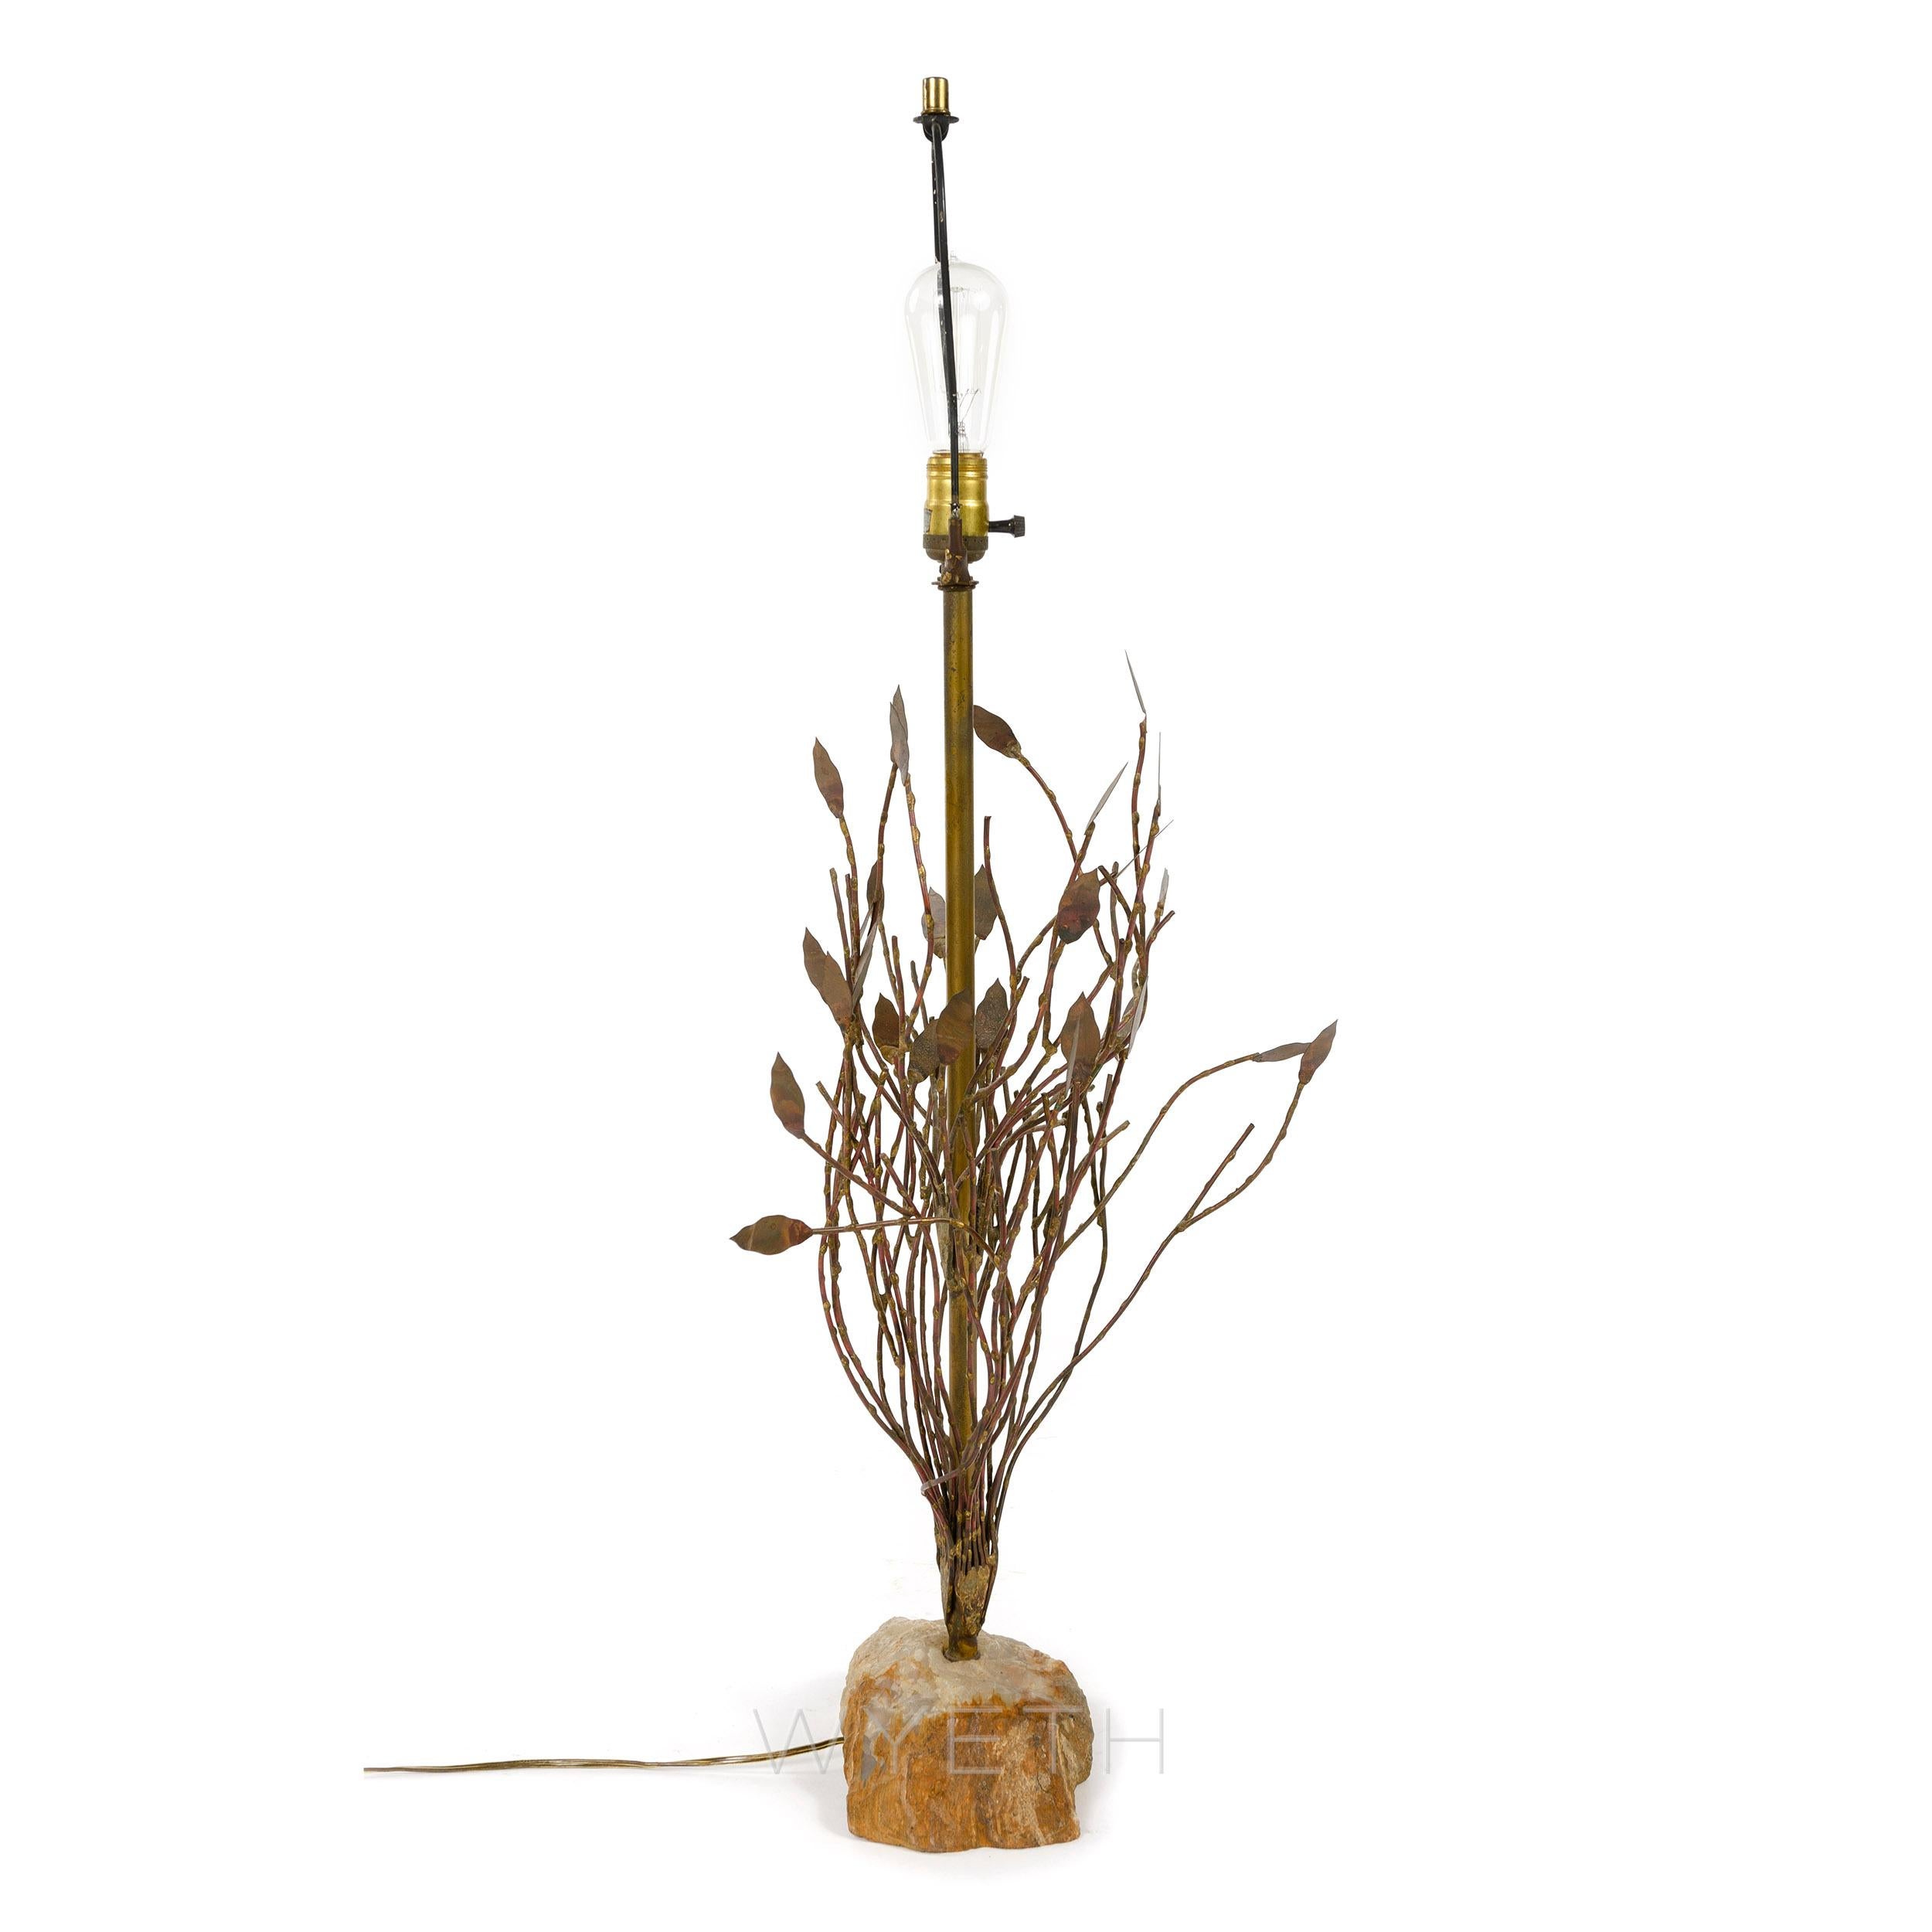 A handcrafted sculptural lamp depicting a leafy tree or bush sprouting from a petrified rock base. Measures: Base height 26.5.